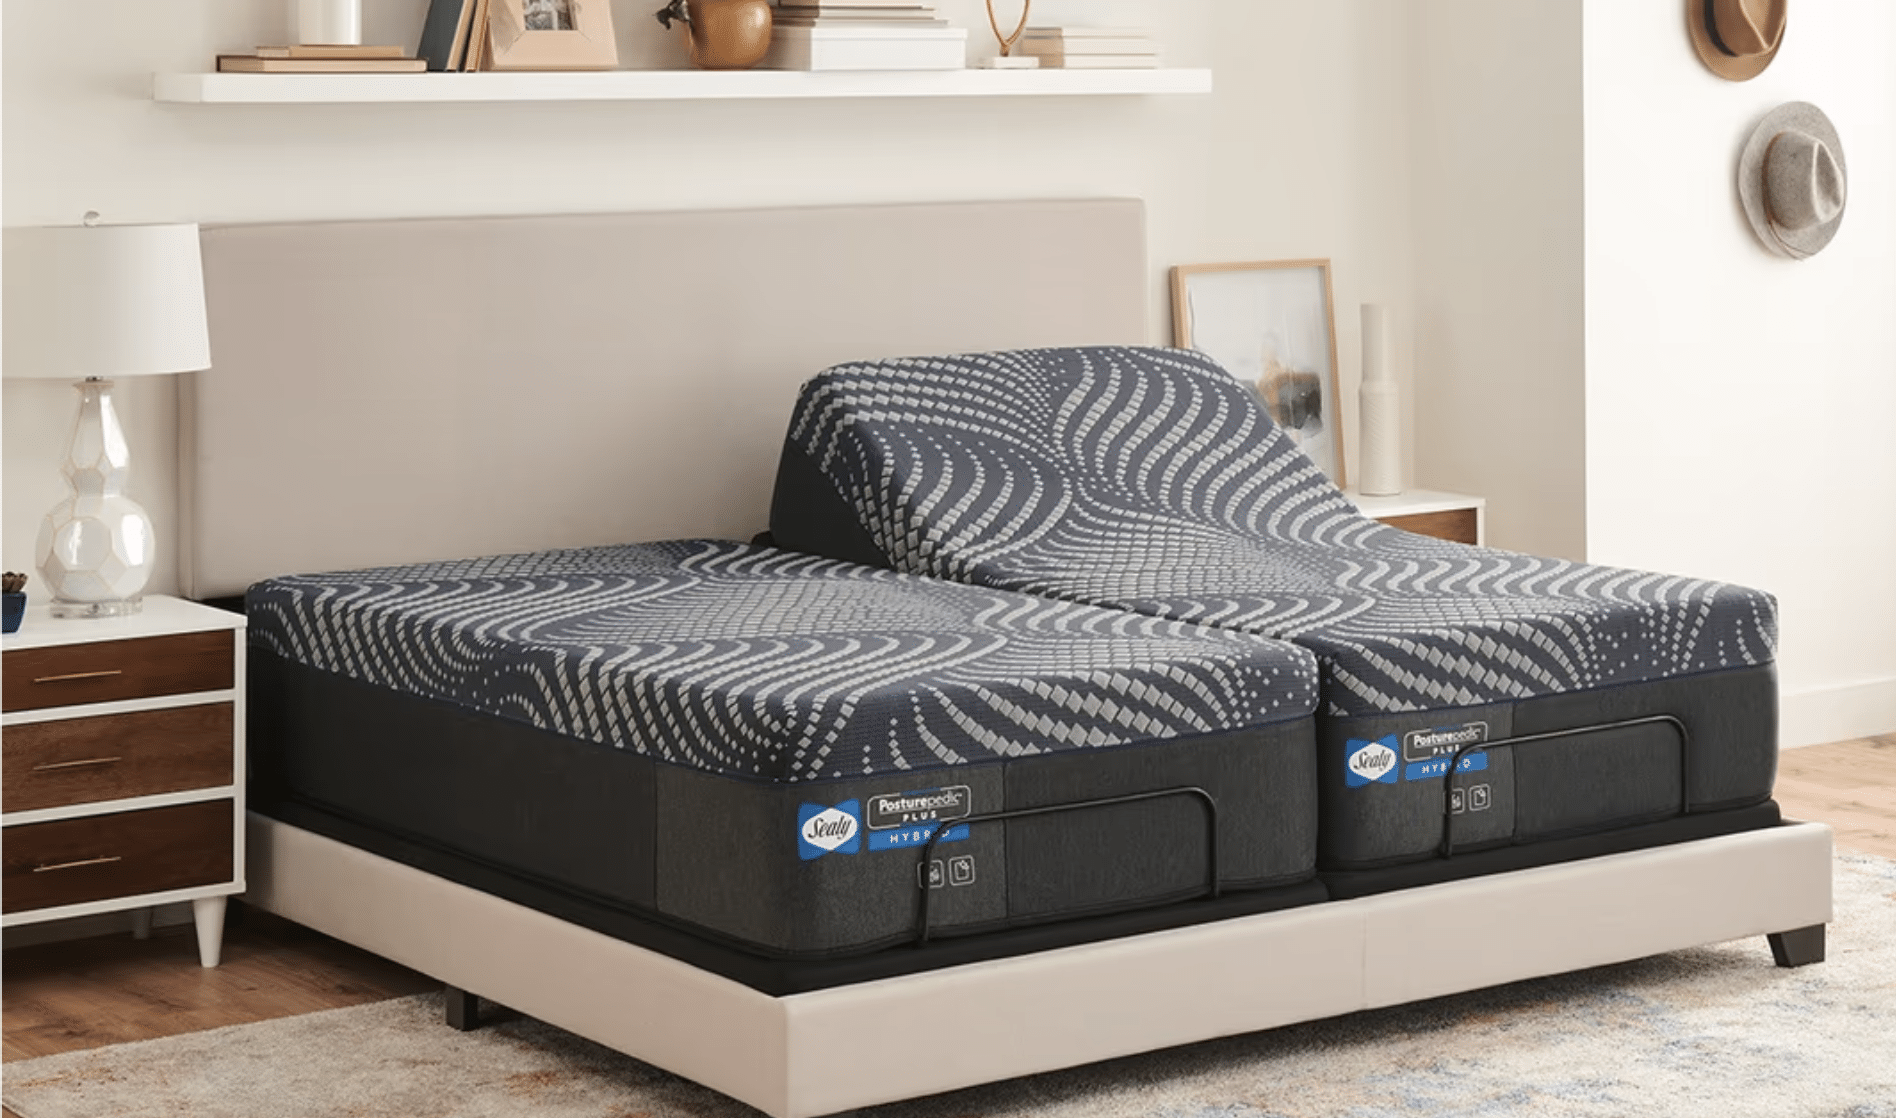 Bedroom featuring the Sealy Ease Power Base adjustable split king bed with mattresses